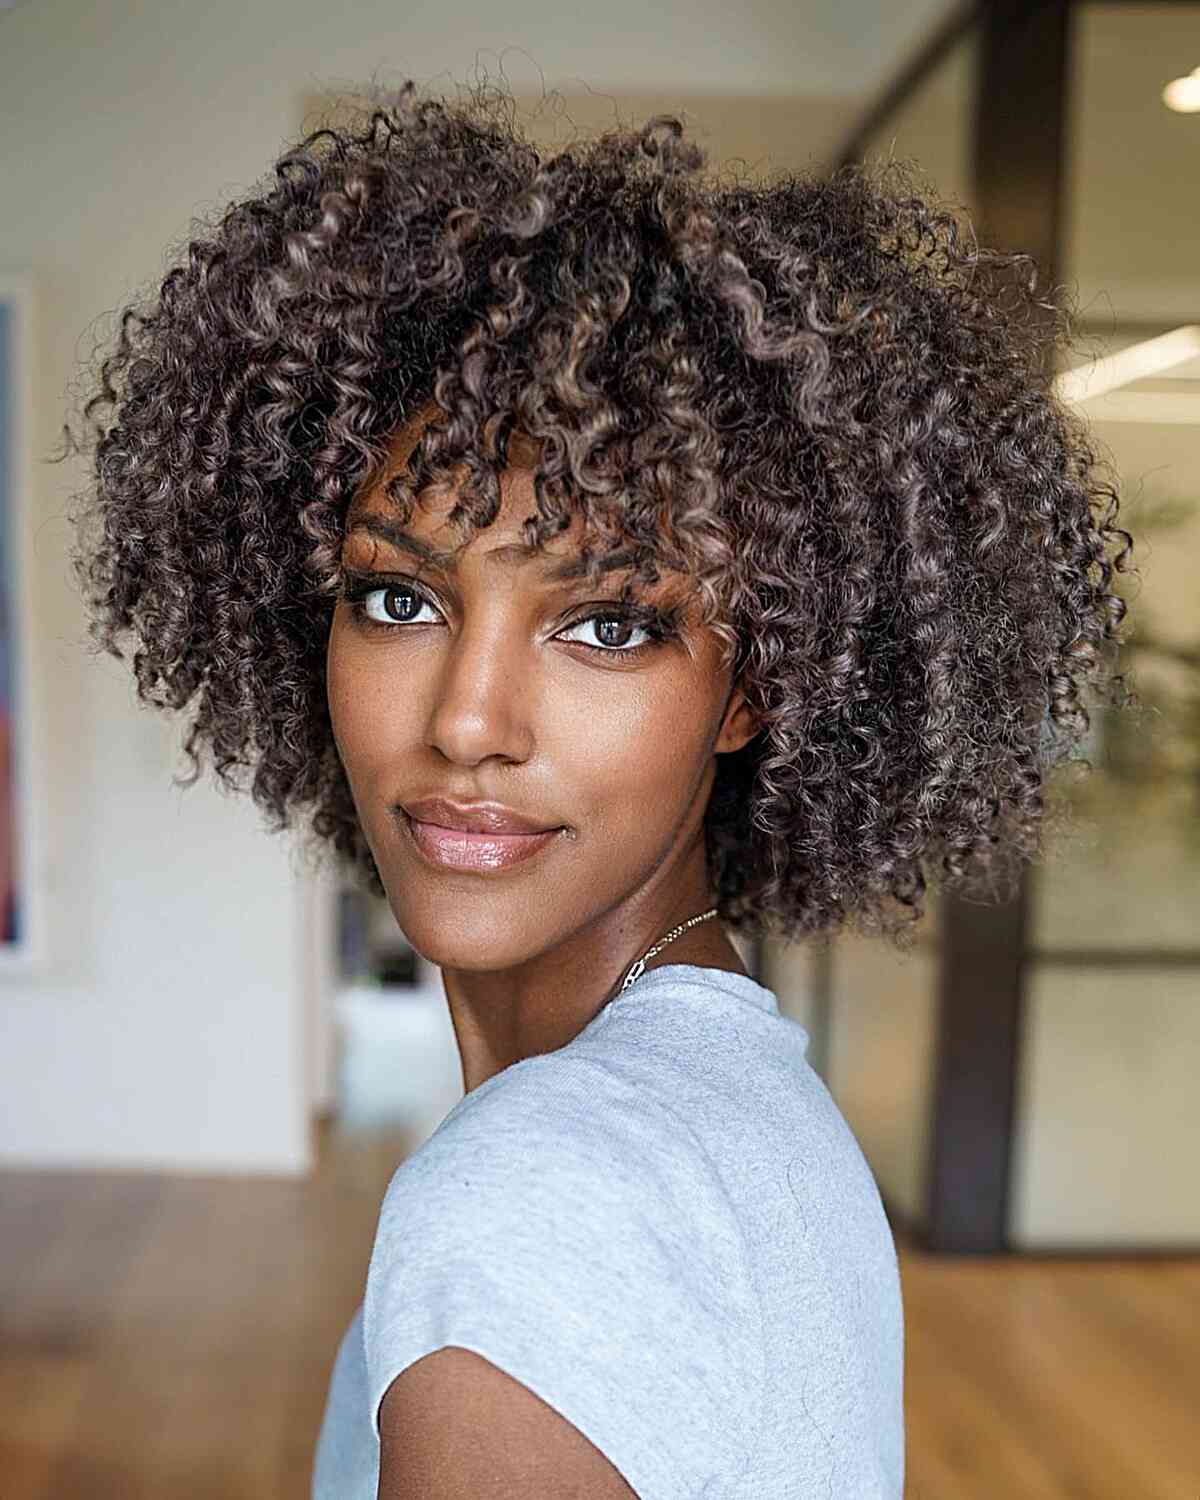 Rose Beige Ringlets for African-American Women with short hair